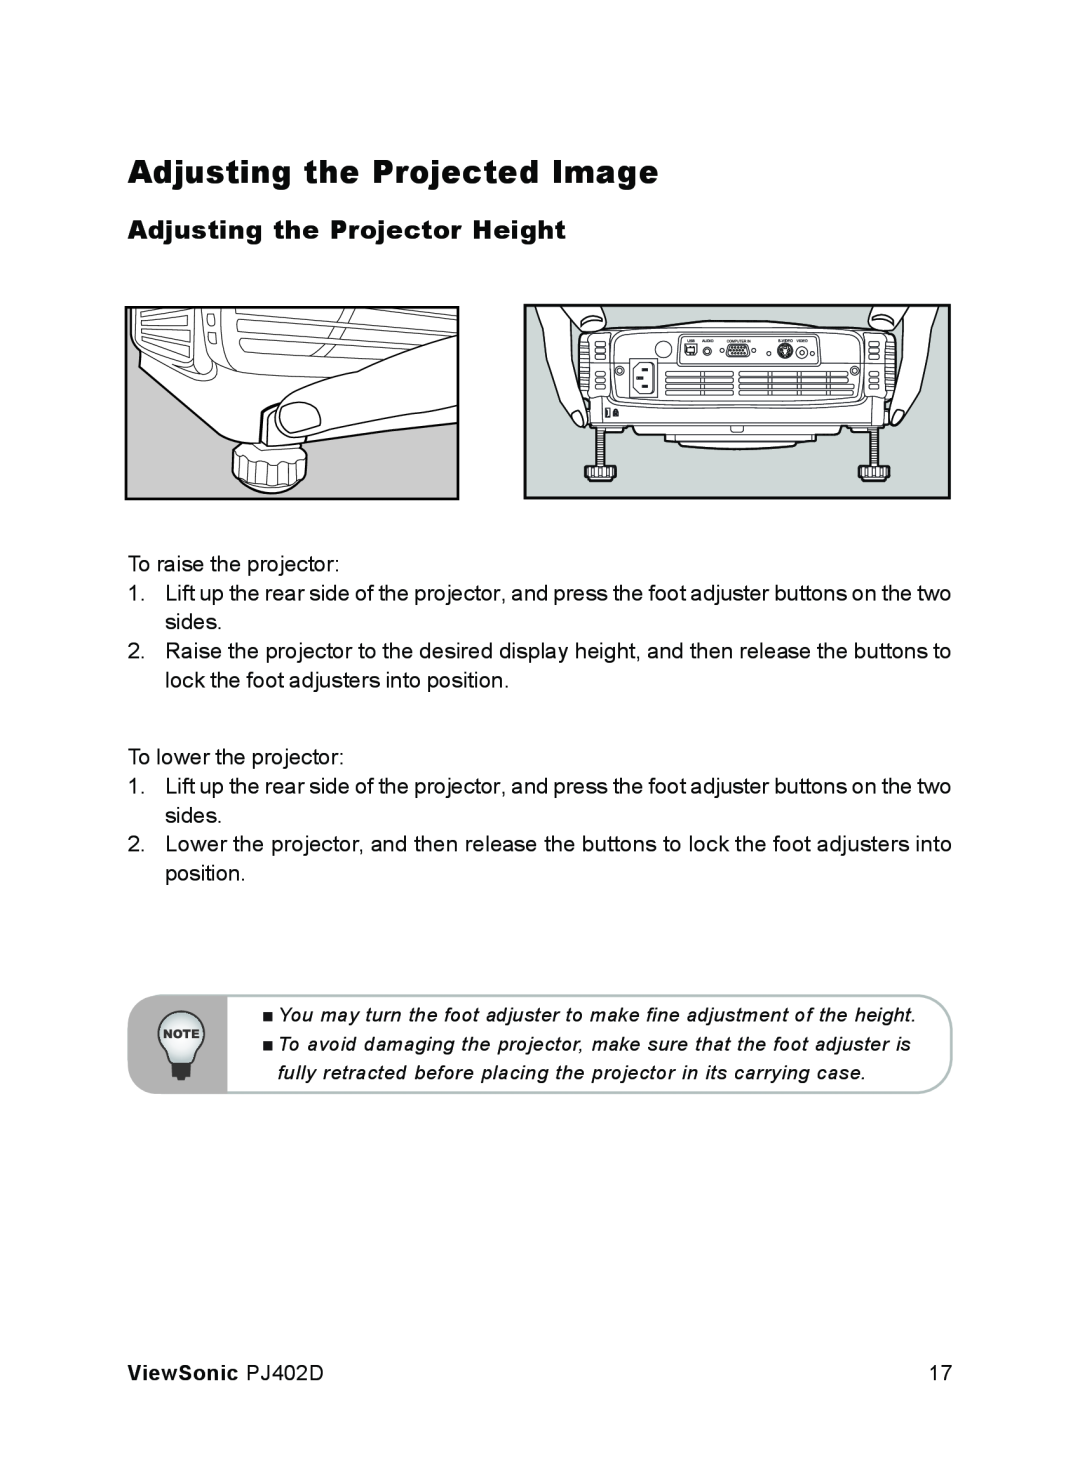 ViewSonic PJ402D manual Adjusting the Projected Image, Adjusting the Projector Height 